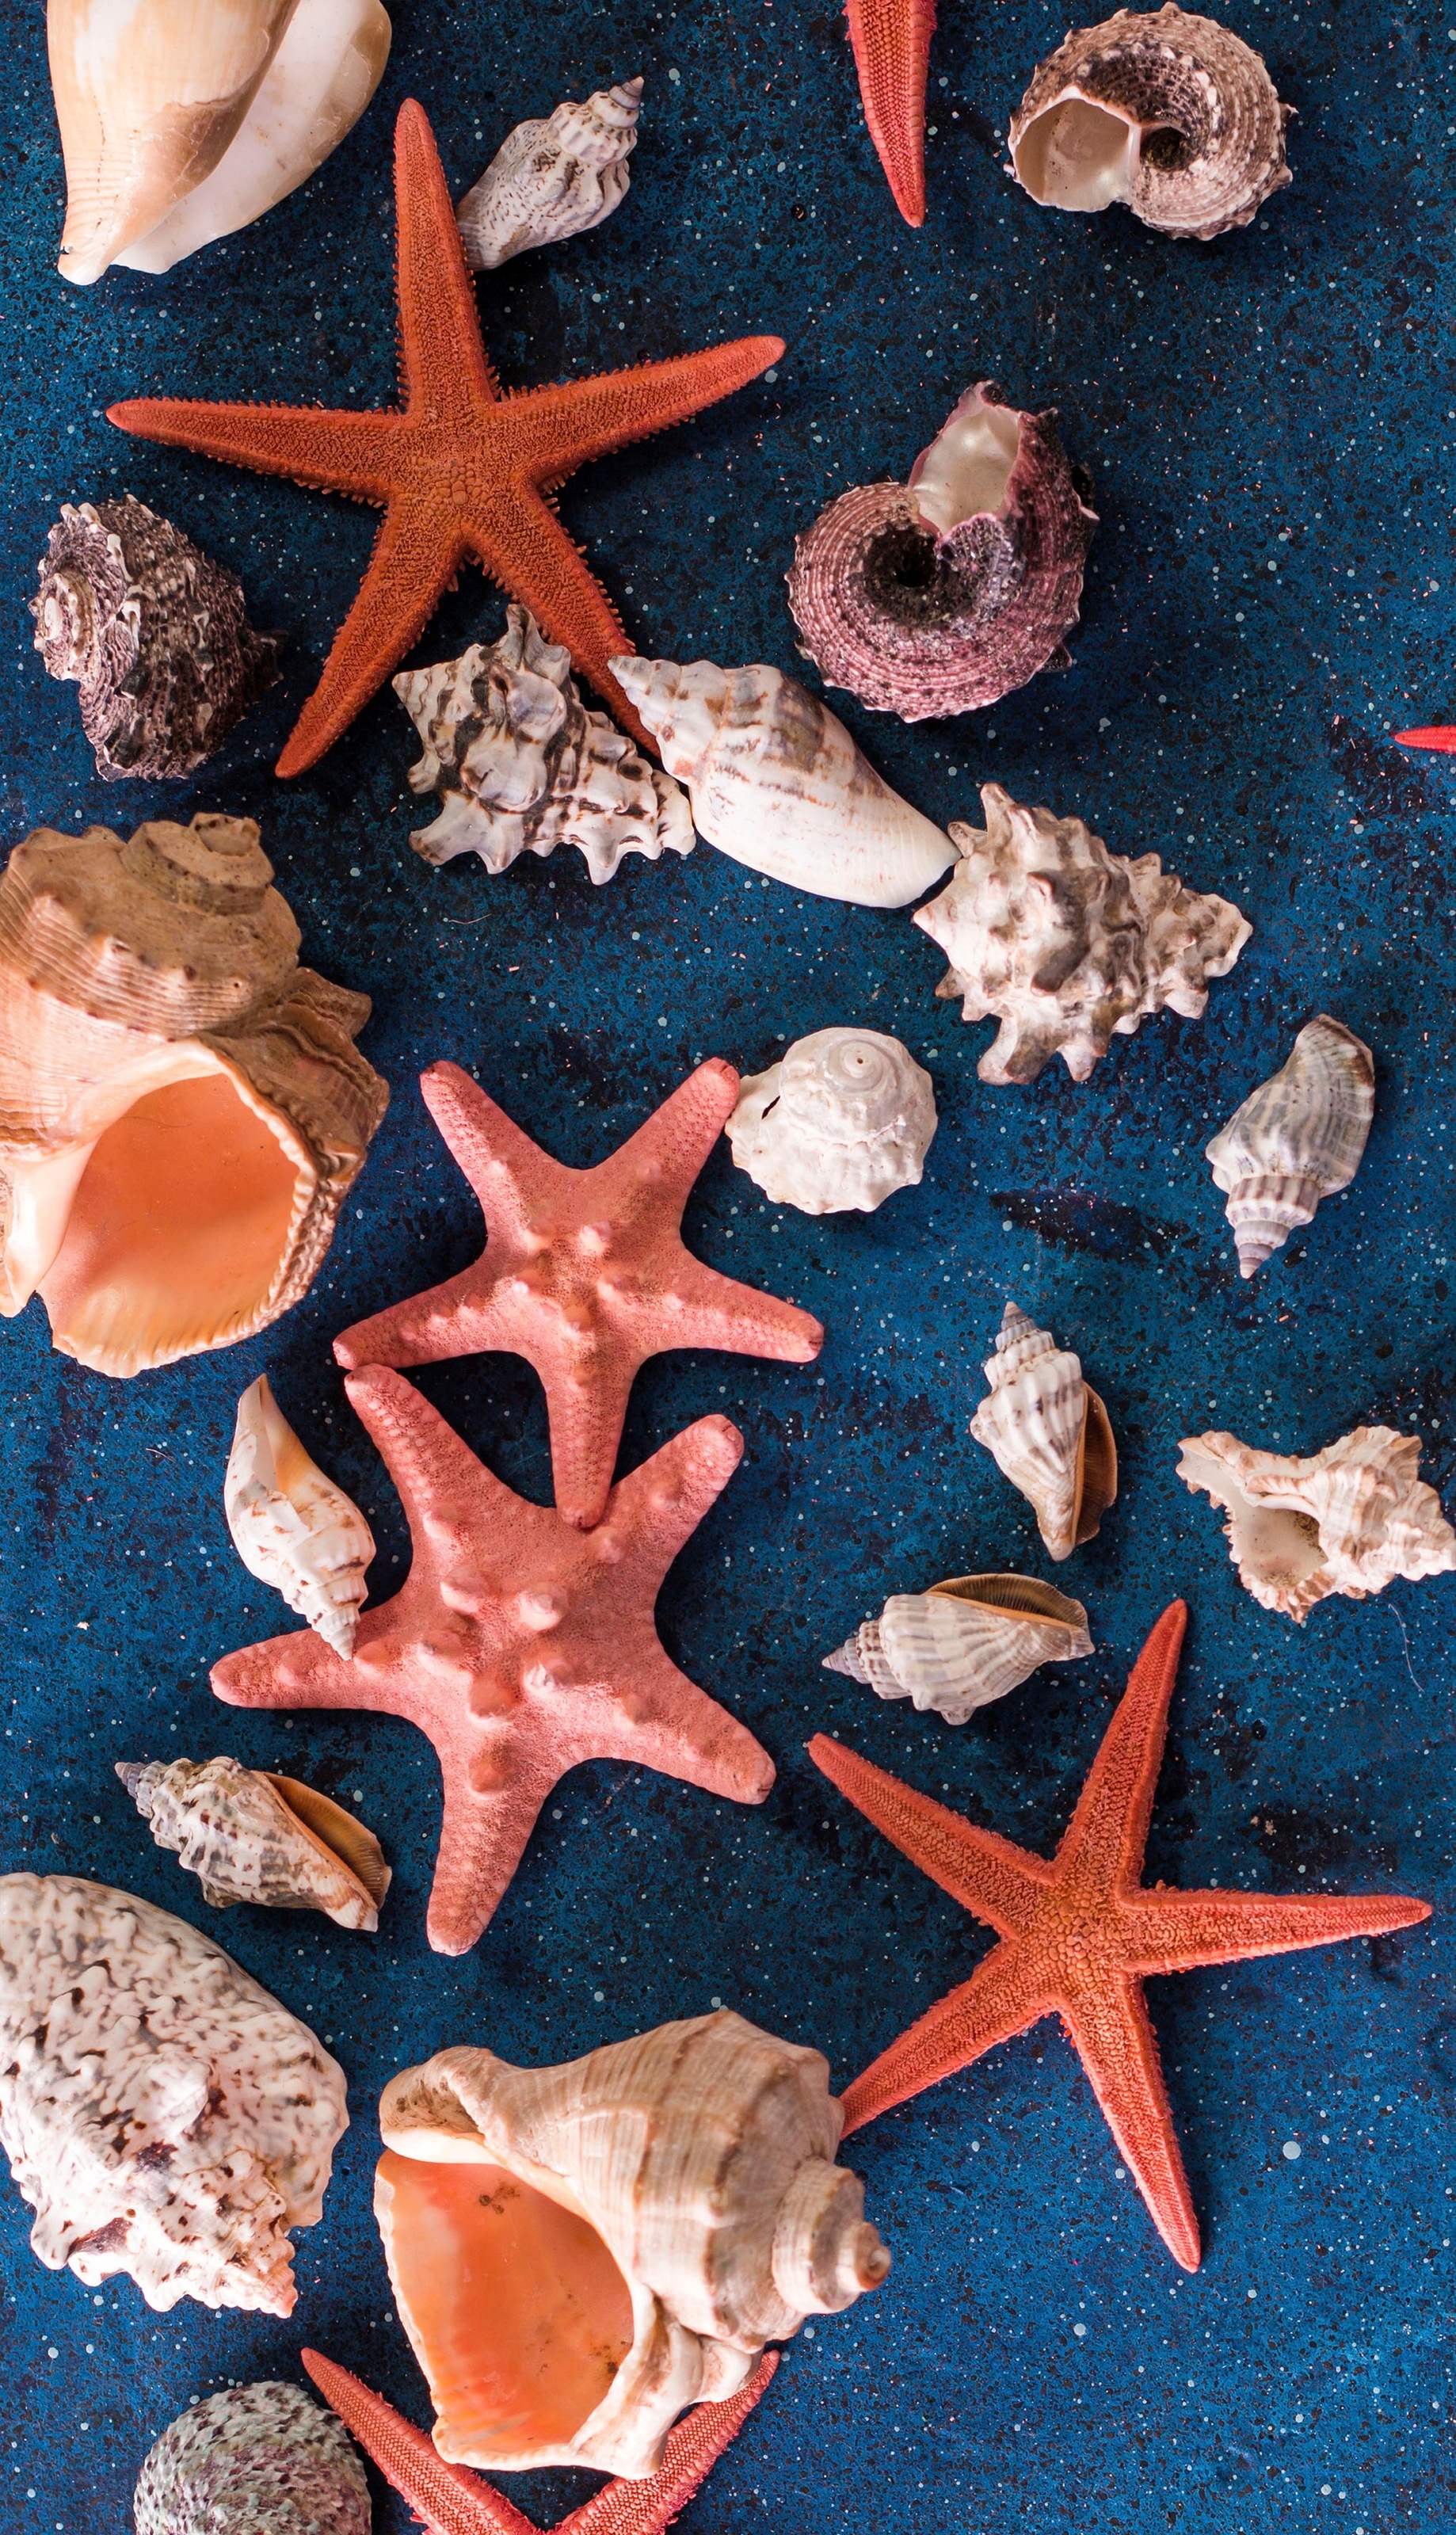 Sea Star: Have tube feet operated by a hydraulic system, Shells. 1840x3200 HD Wallpaper.